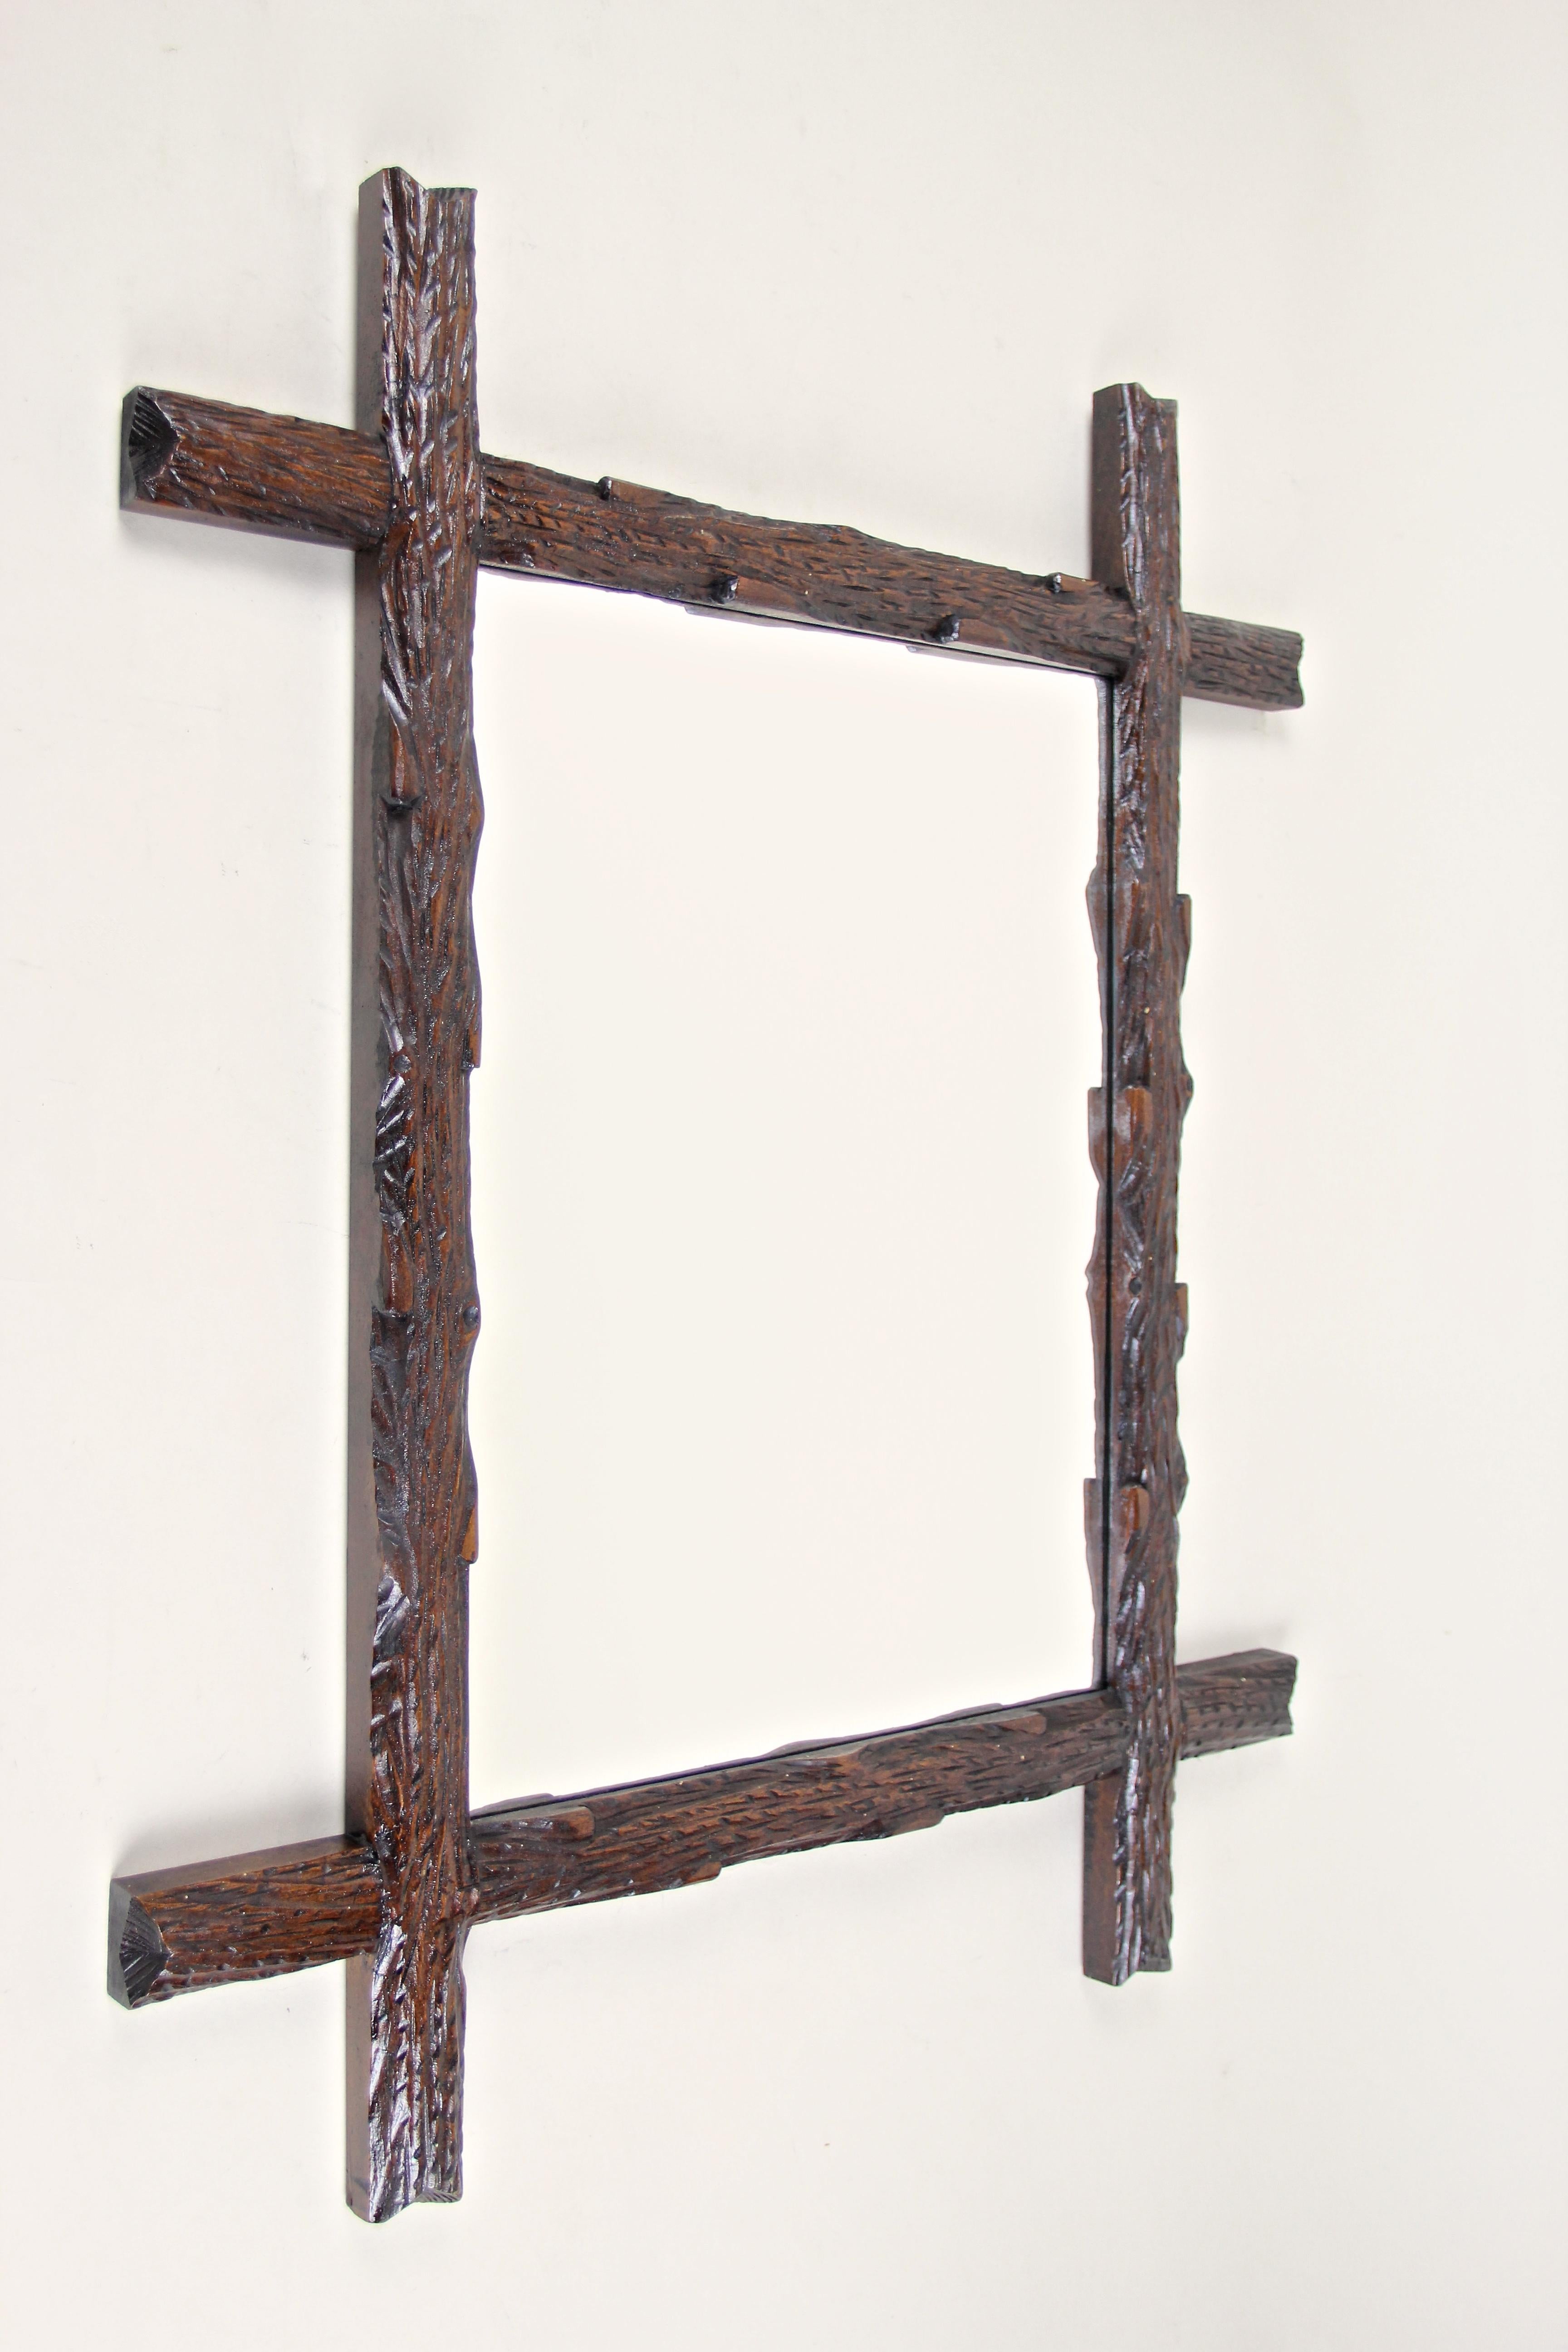 Great rustic wooden wall mirror in our high demanded Black Forest mirror collection. From Austria circa 1880 comes this unique artfully hand carved frame with protruding corners and impresses with its rural 